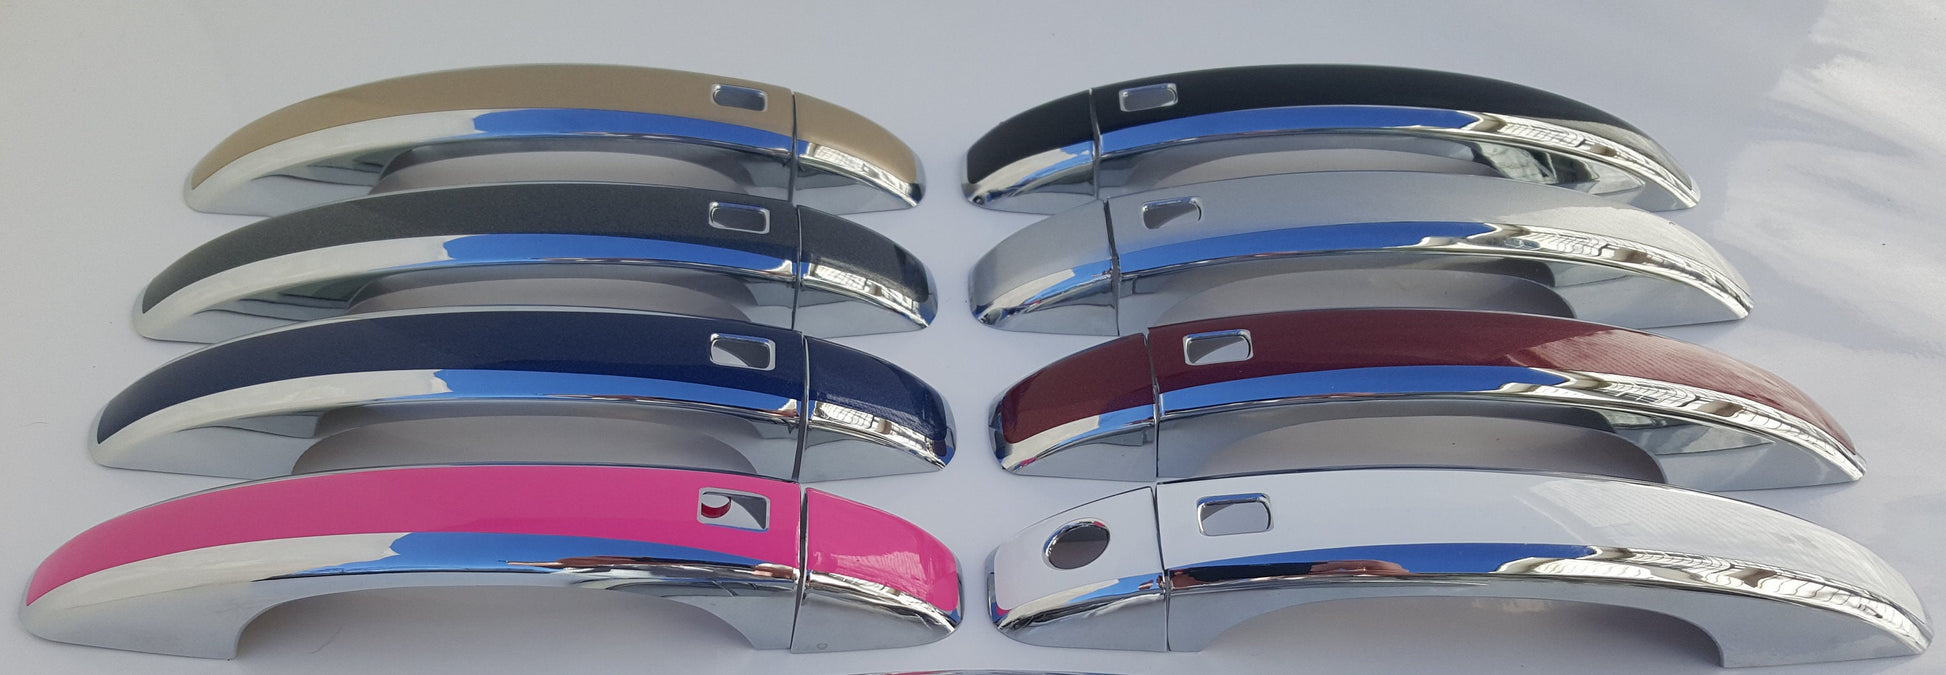 Full Set of Custom Chrome Door Handle Overlays / Covers For the 2008 – 2015 Audi A4 -- You Choose the Middle Color Insert